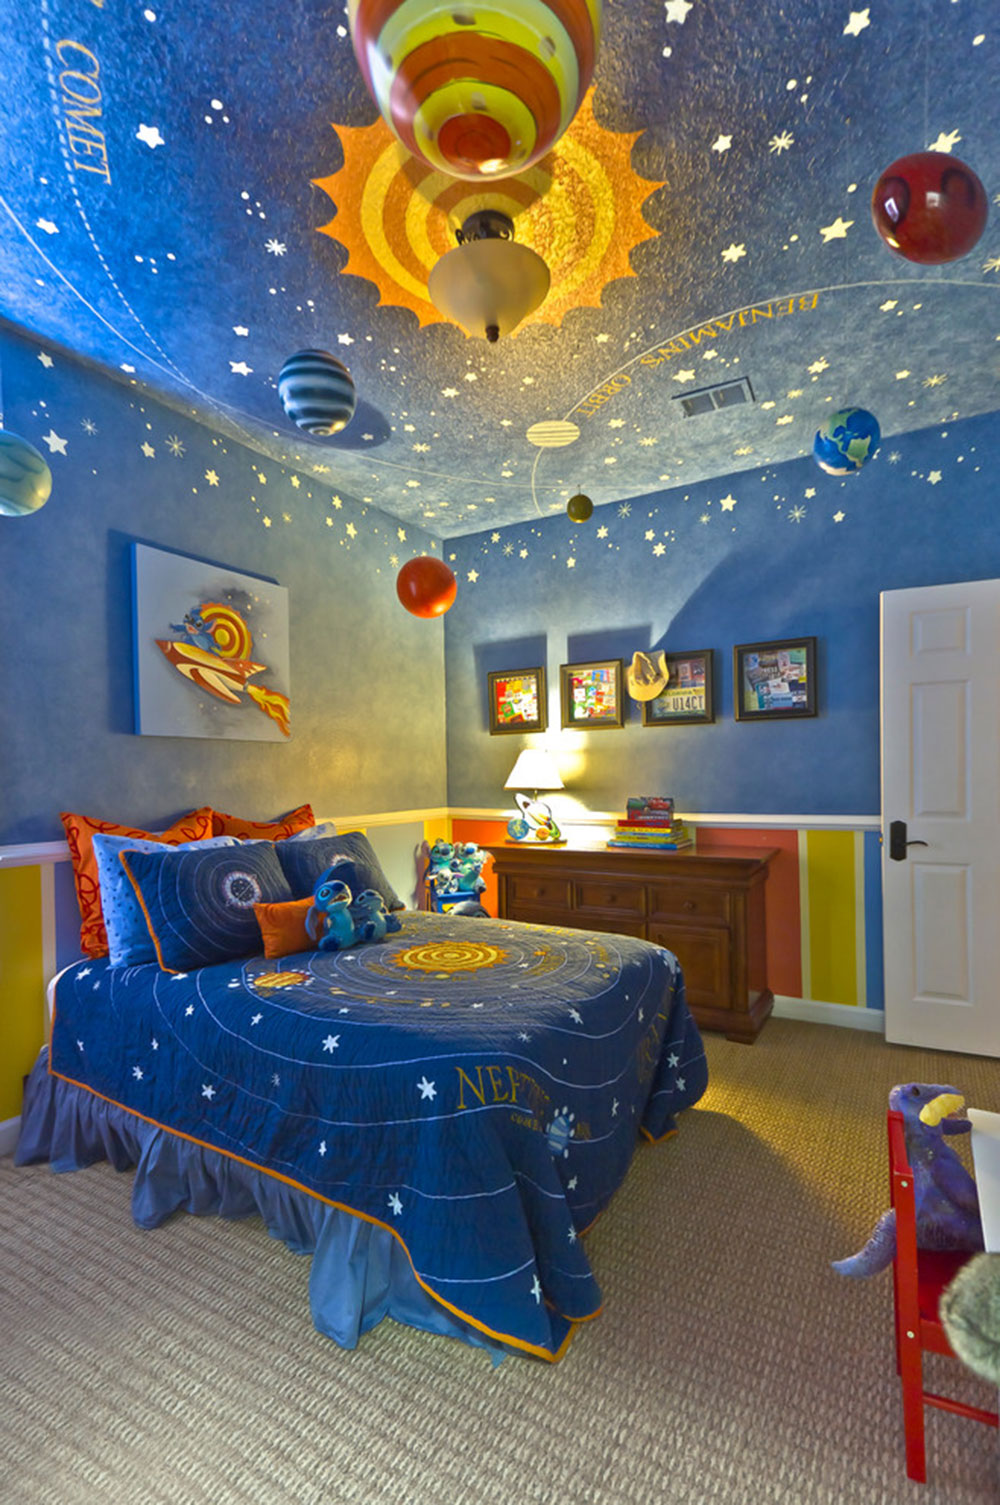 Nursery-by-room coast construction ideas for toddler rooms to give your child the best possible space